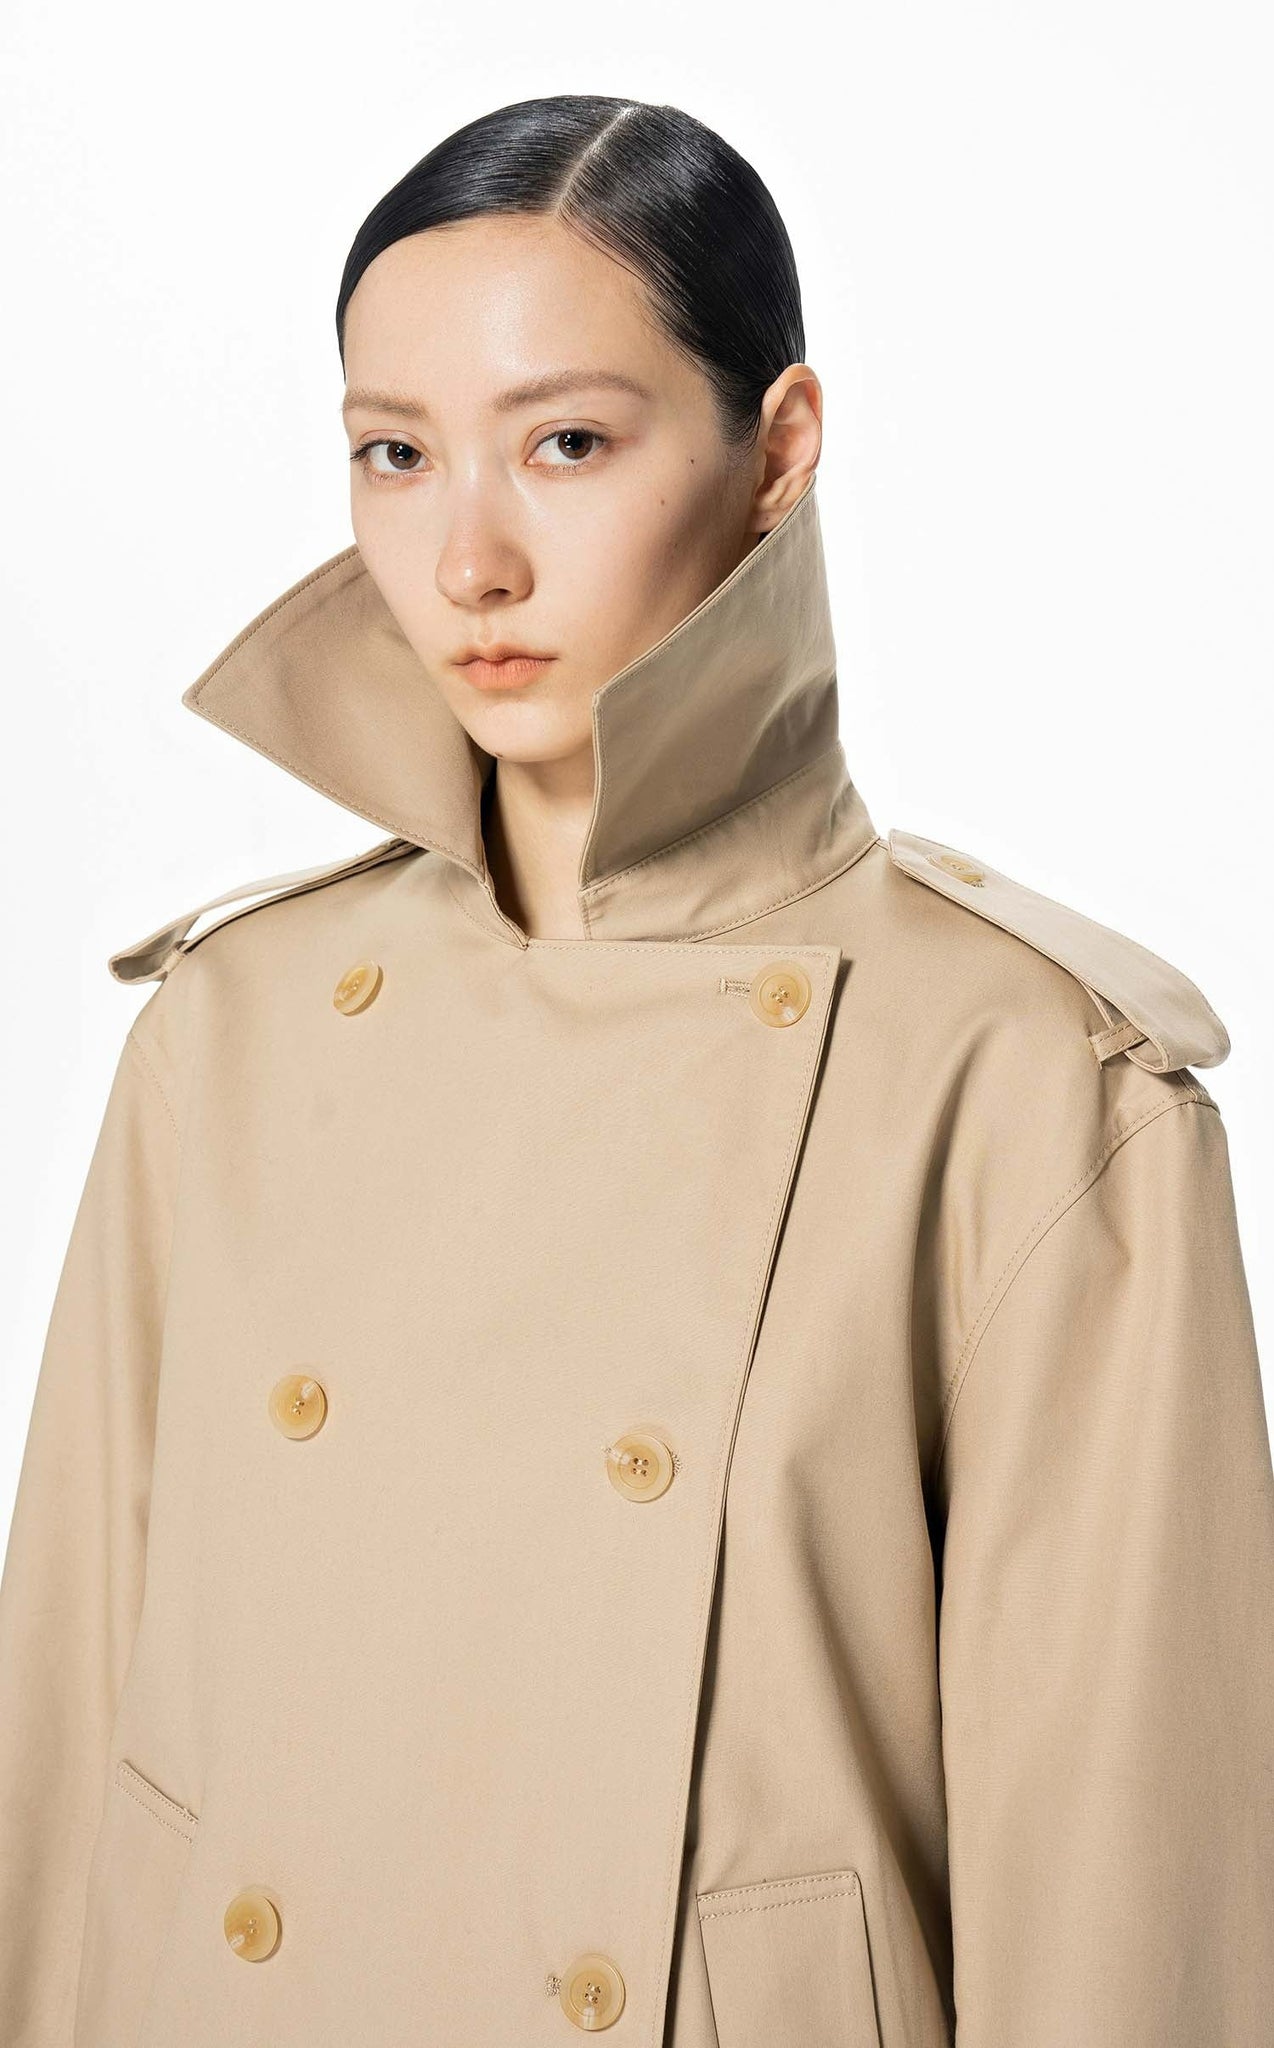 Coat / JNBY Loose Fit Classic H-Line Trench Coat